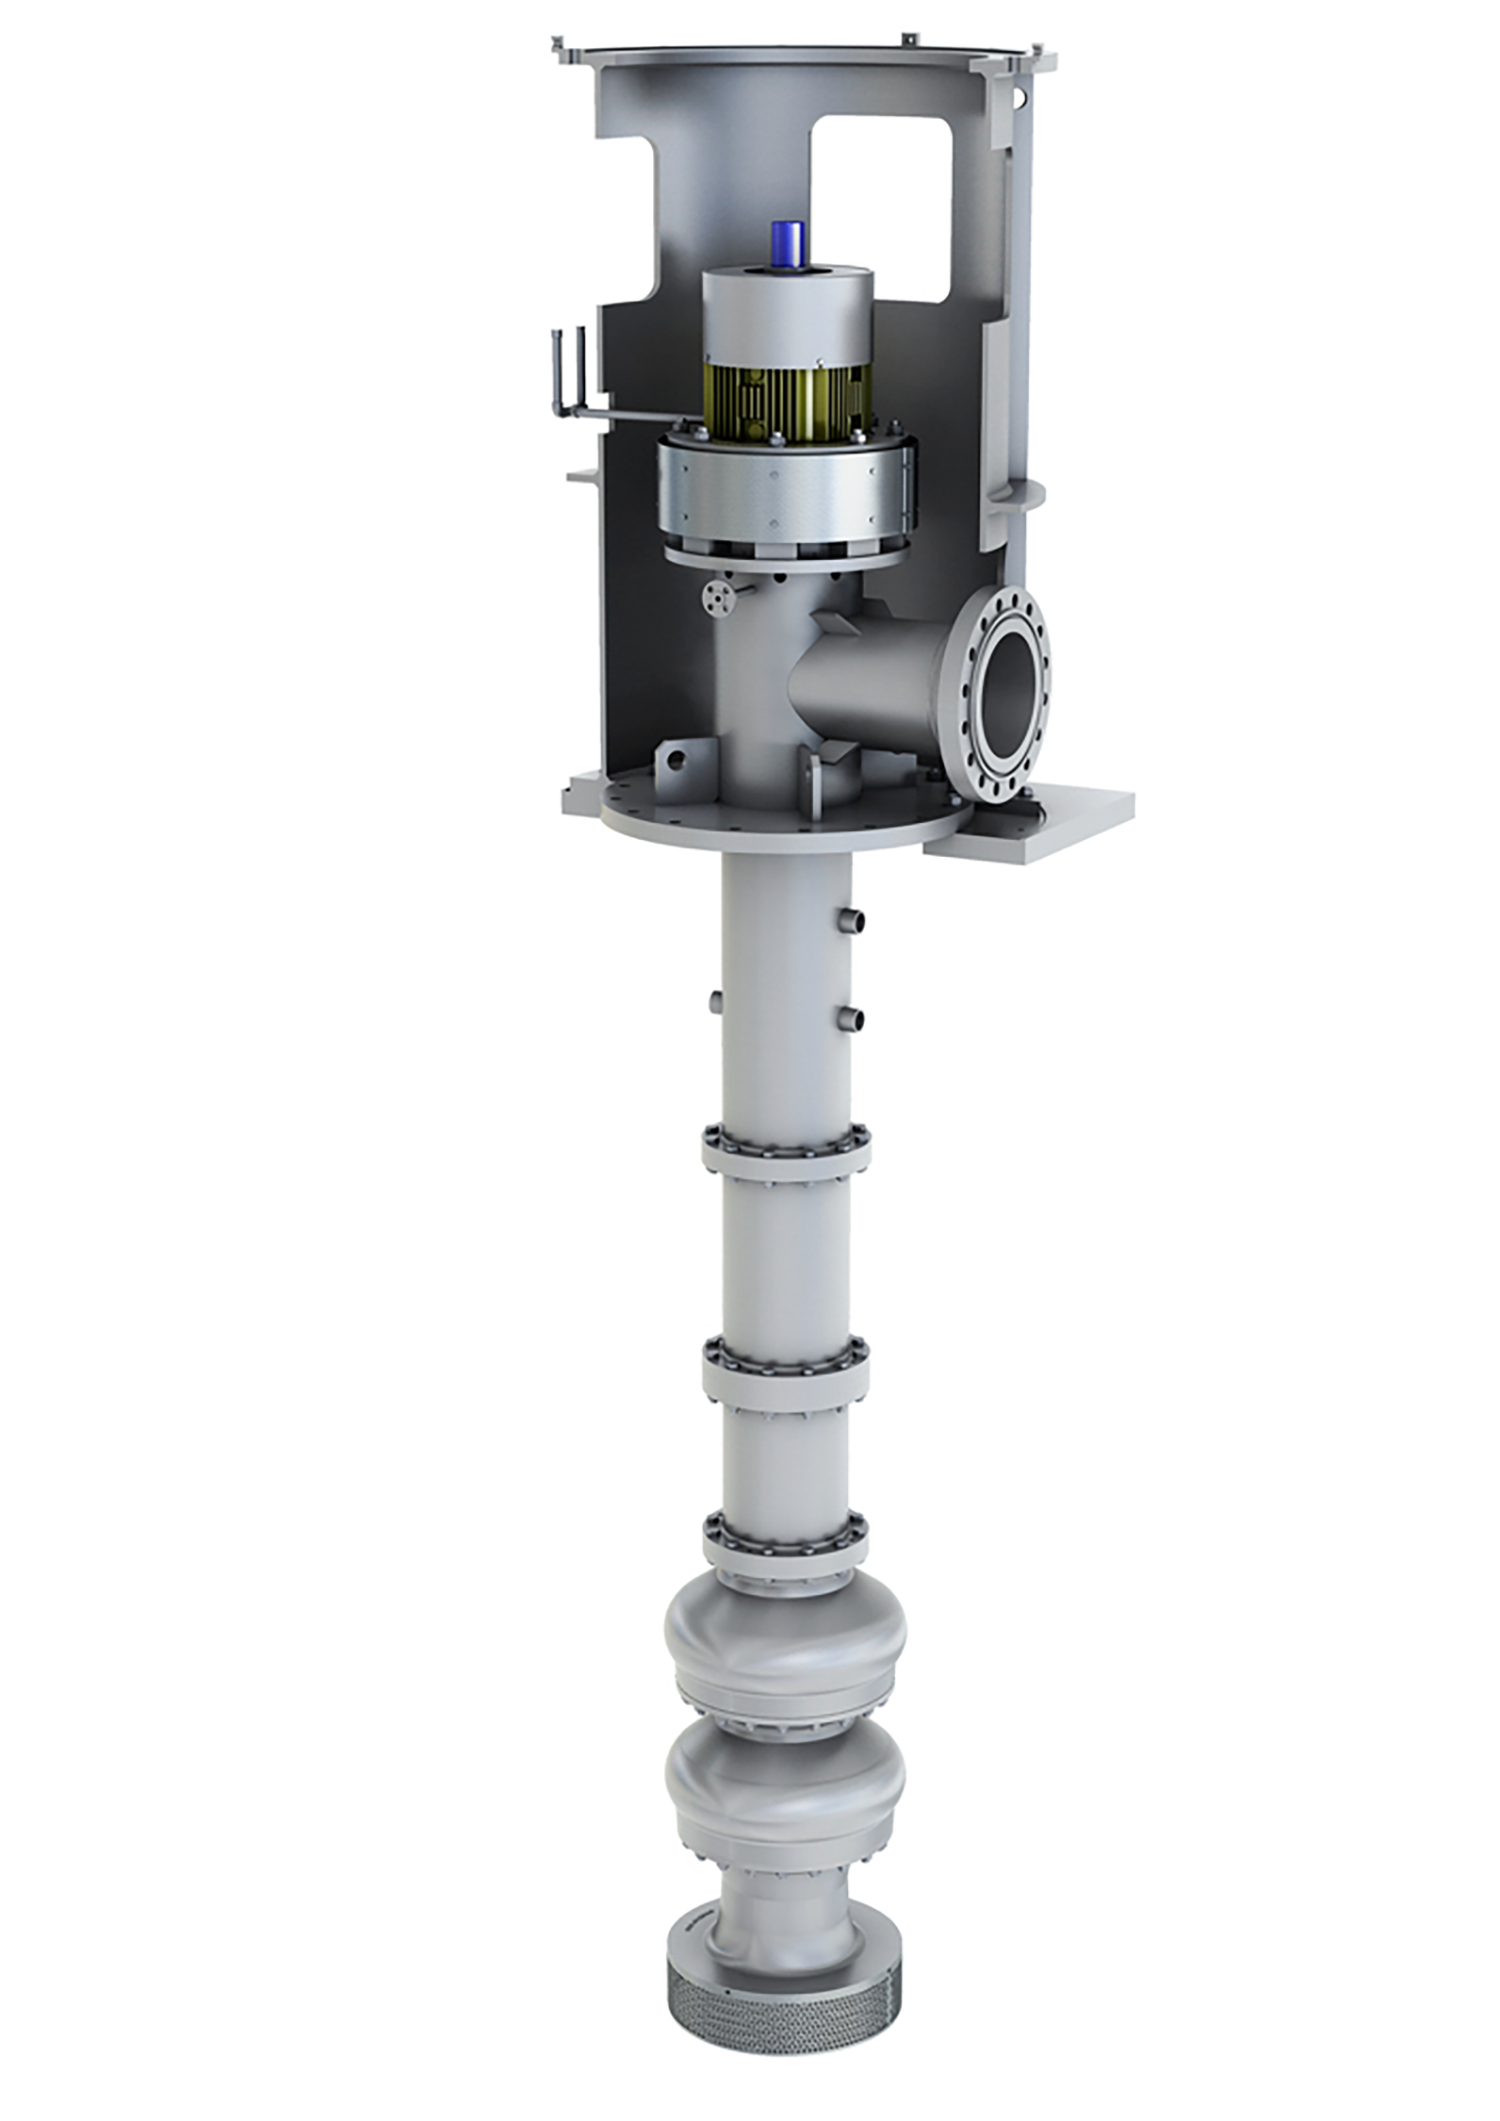 Sulzer is contributing to decarbonizing the energy industry with the supply of a custom VNY molten salt pump to the Molten Salts Storage (MOSS) project in Denmark.